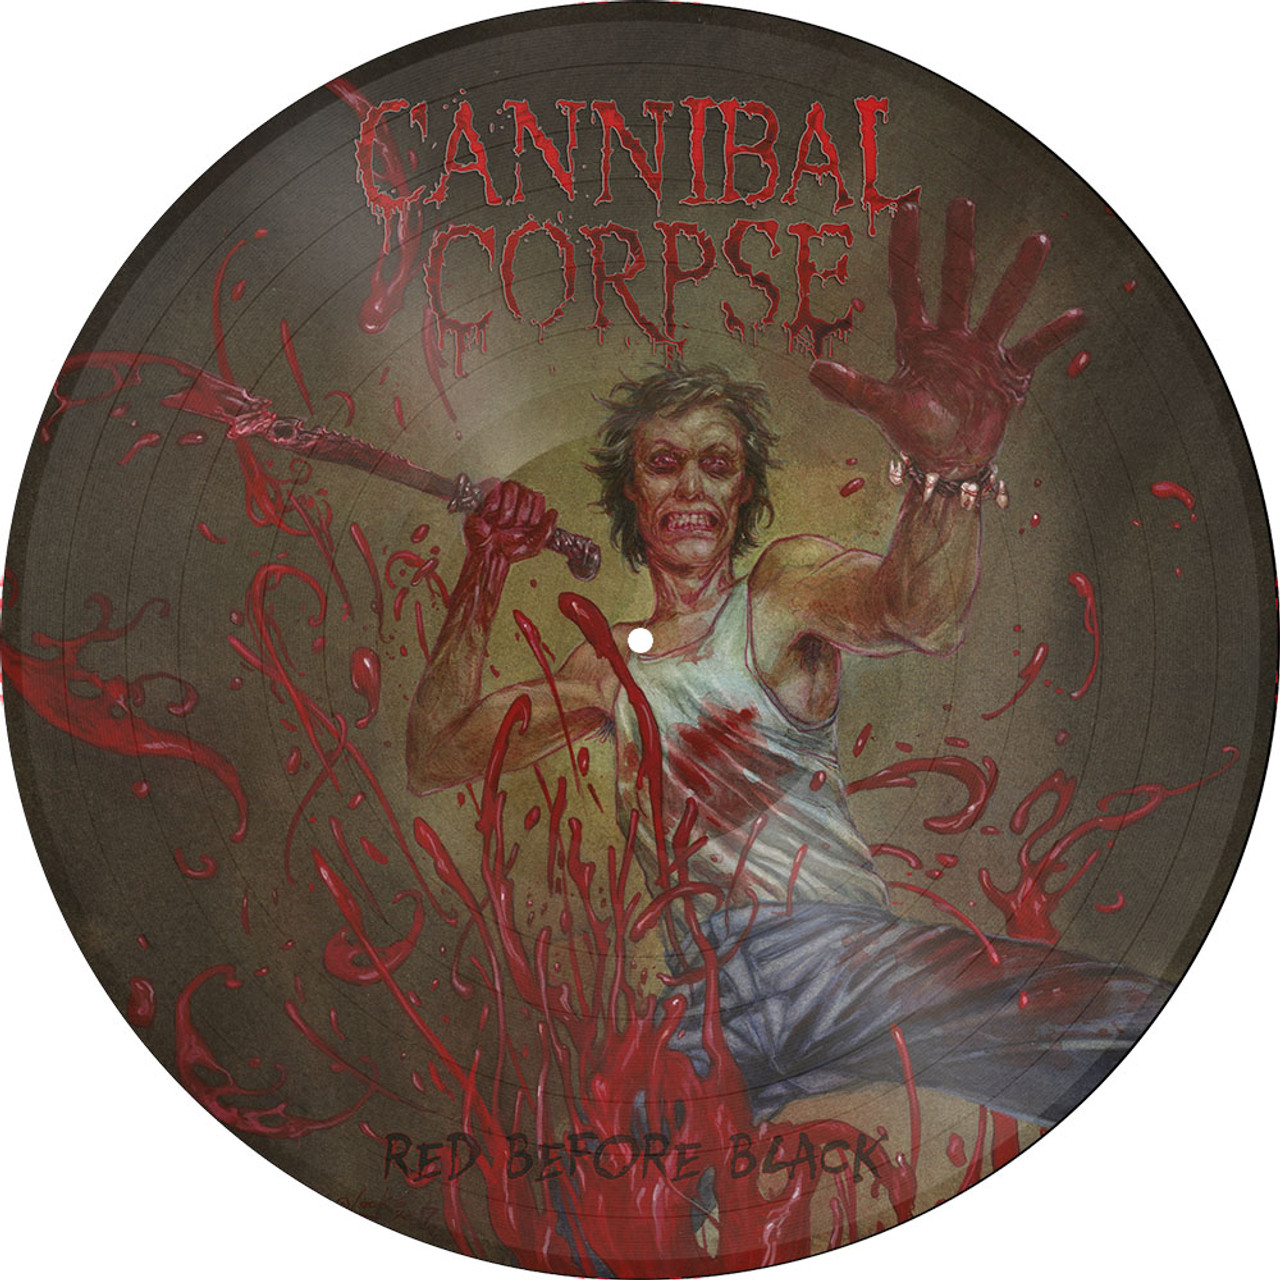 Cannibal Corpse 'Red Before Black' LP Picture Disc